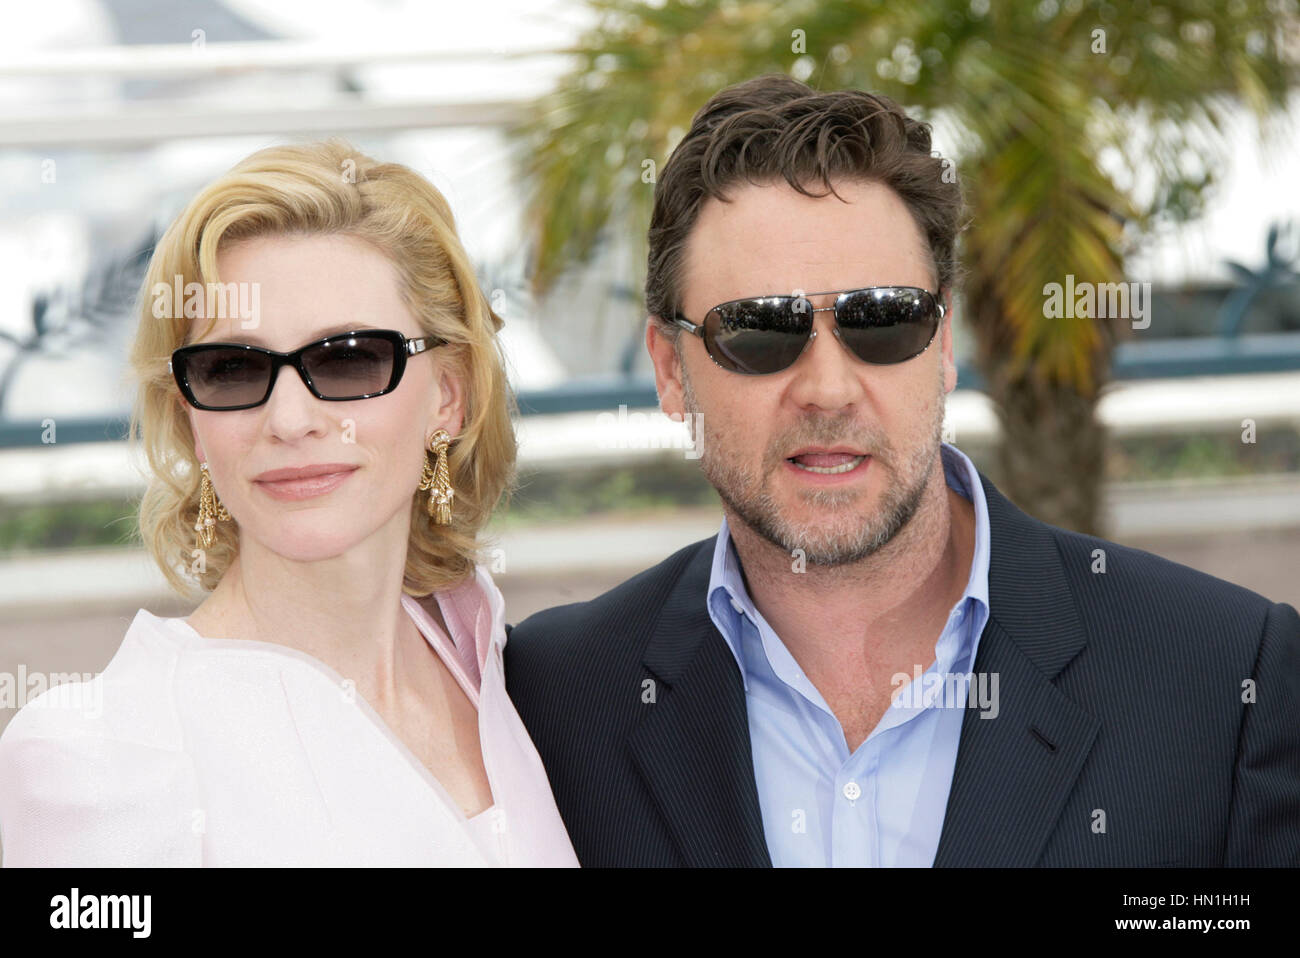 Cate Blanchett and Russell Crowe at the photocall for the film, 'Robin Hood', in Cannes, France on May 12, 2010. Photo by Francis Specker Stock Photo